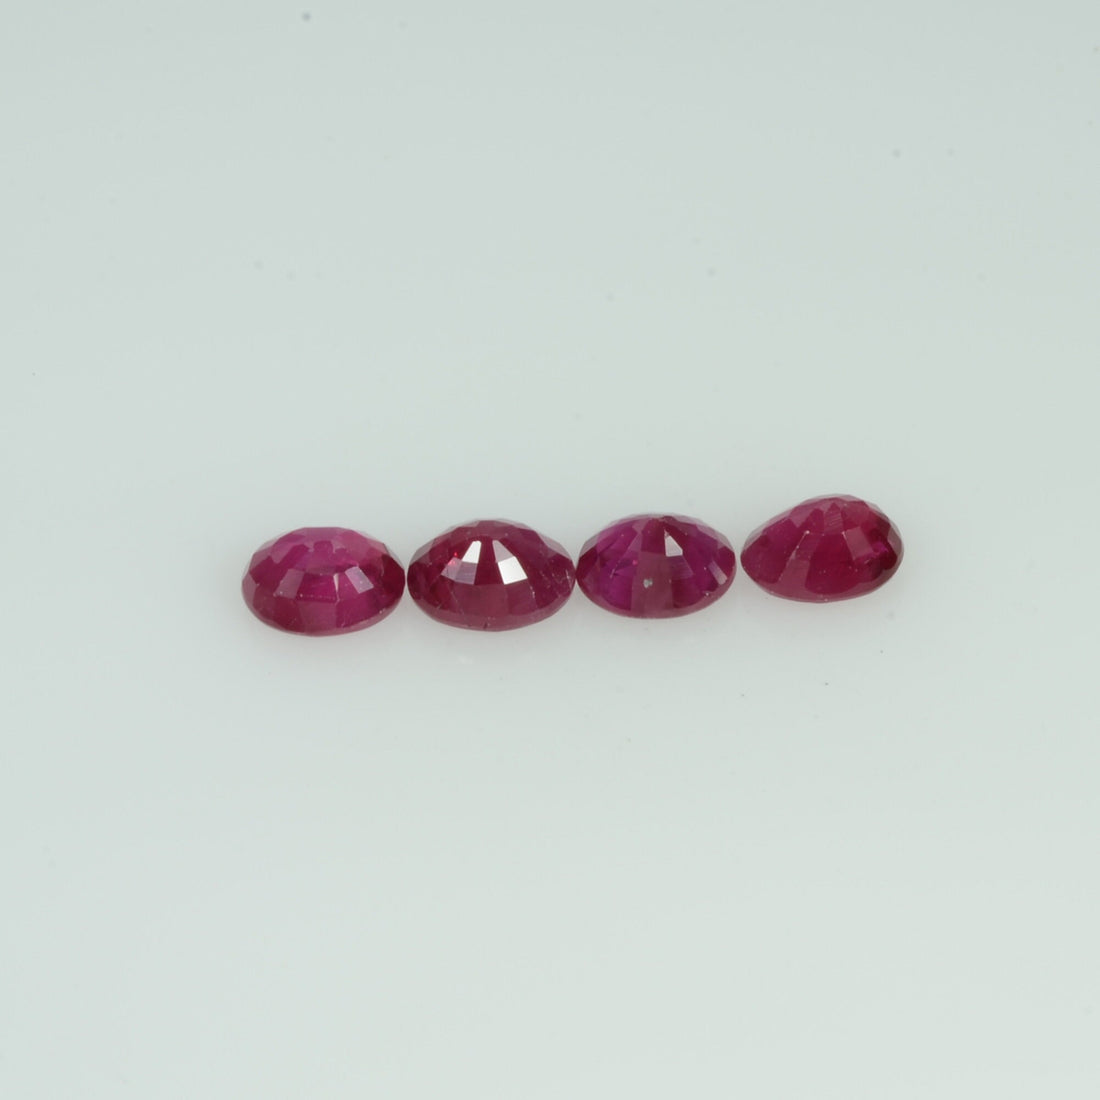 4.5x3.5 MM Natural Ruby Loose Gemstone Oval Cut